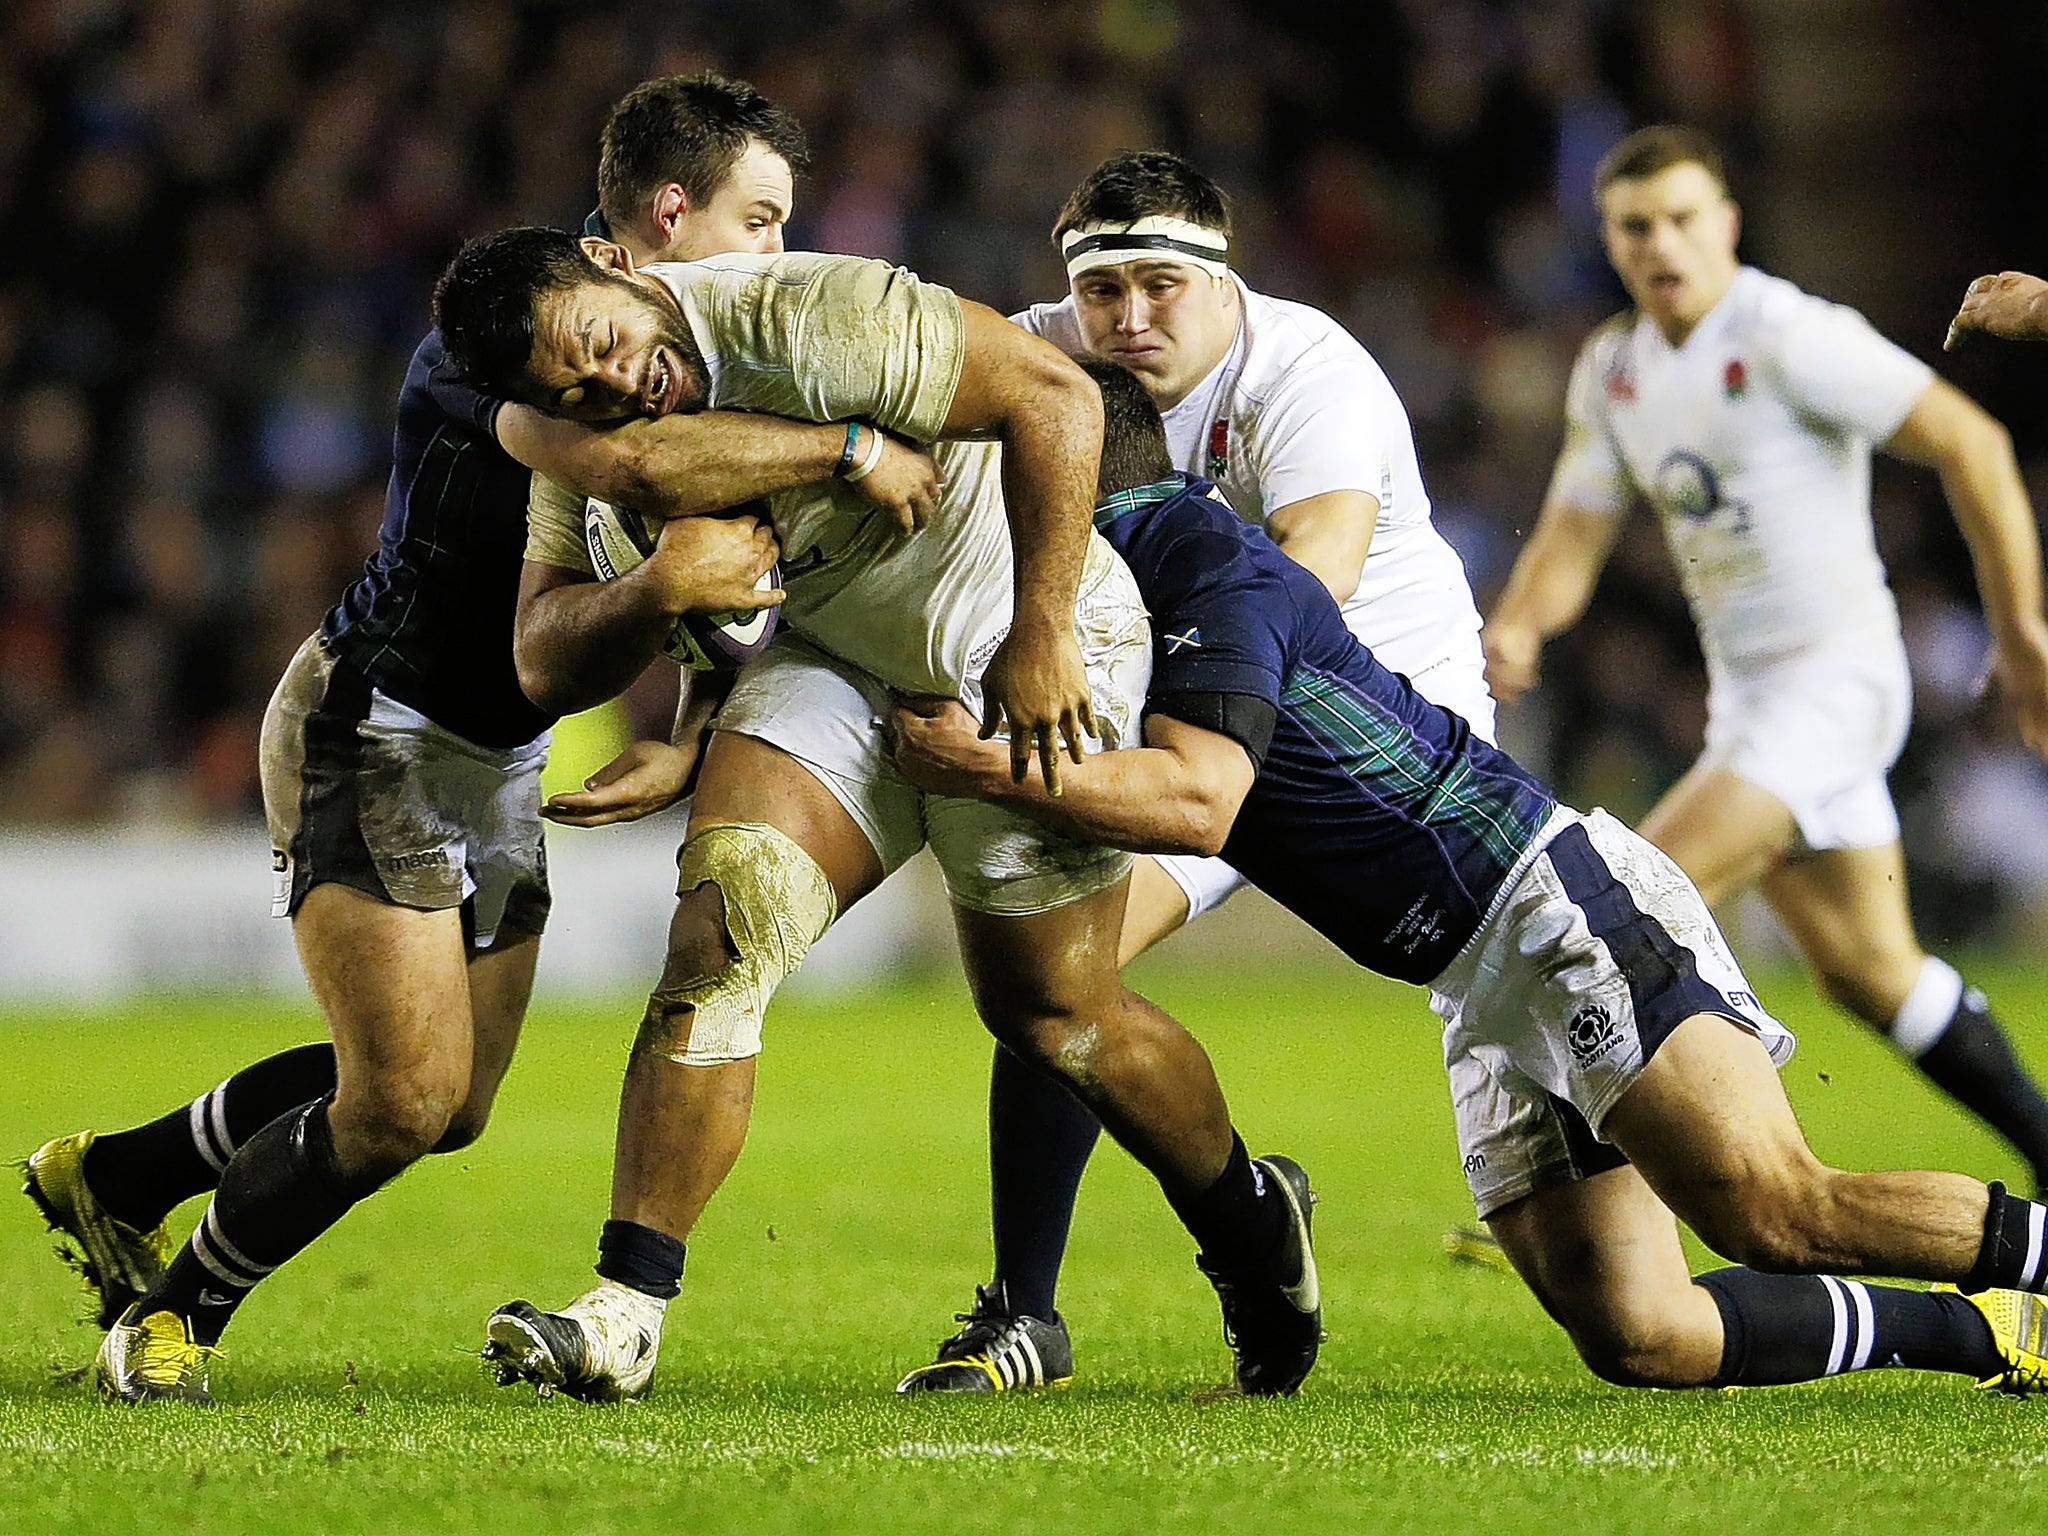 Billy Vunipola makes dogged, unstoppable progress through Scotland’s defence at Murrayfield on Saturday